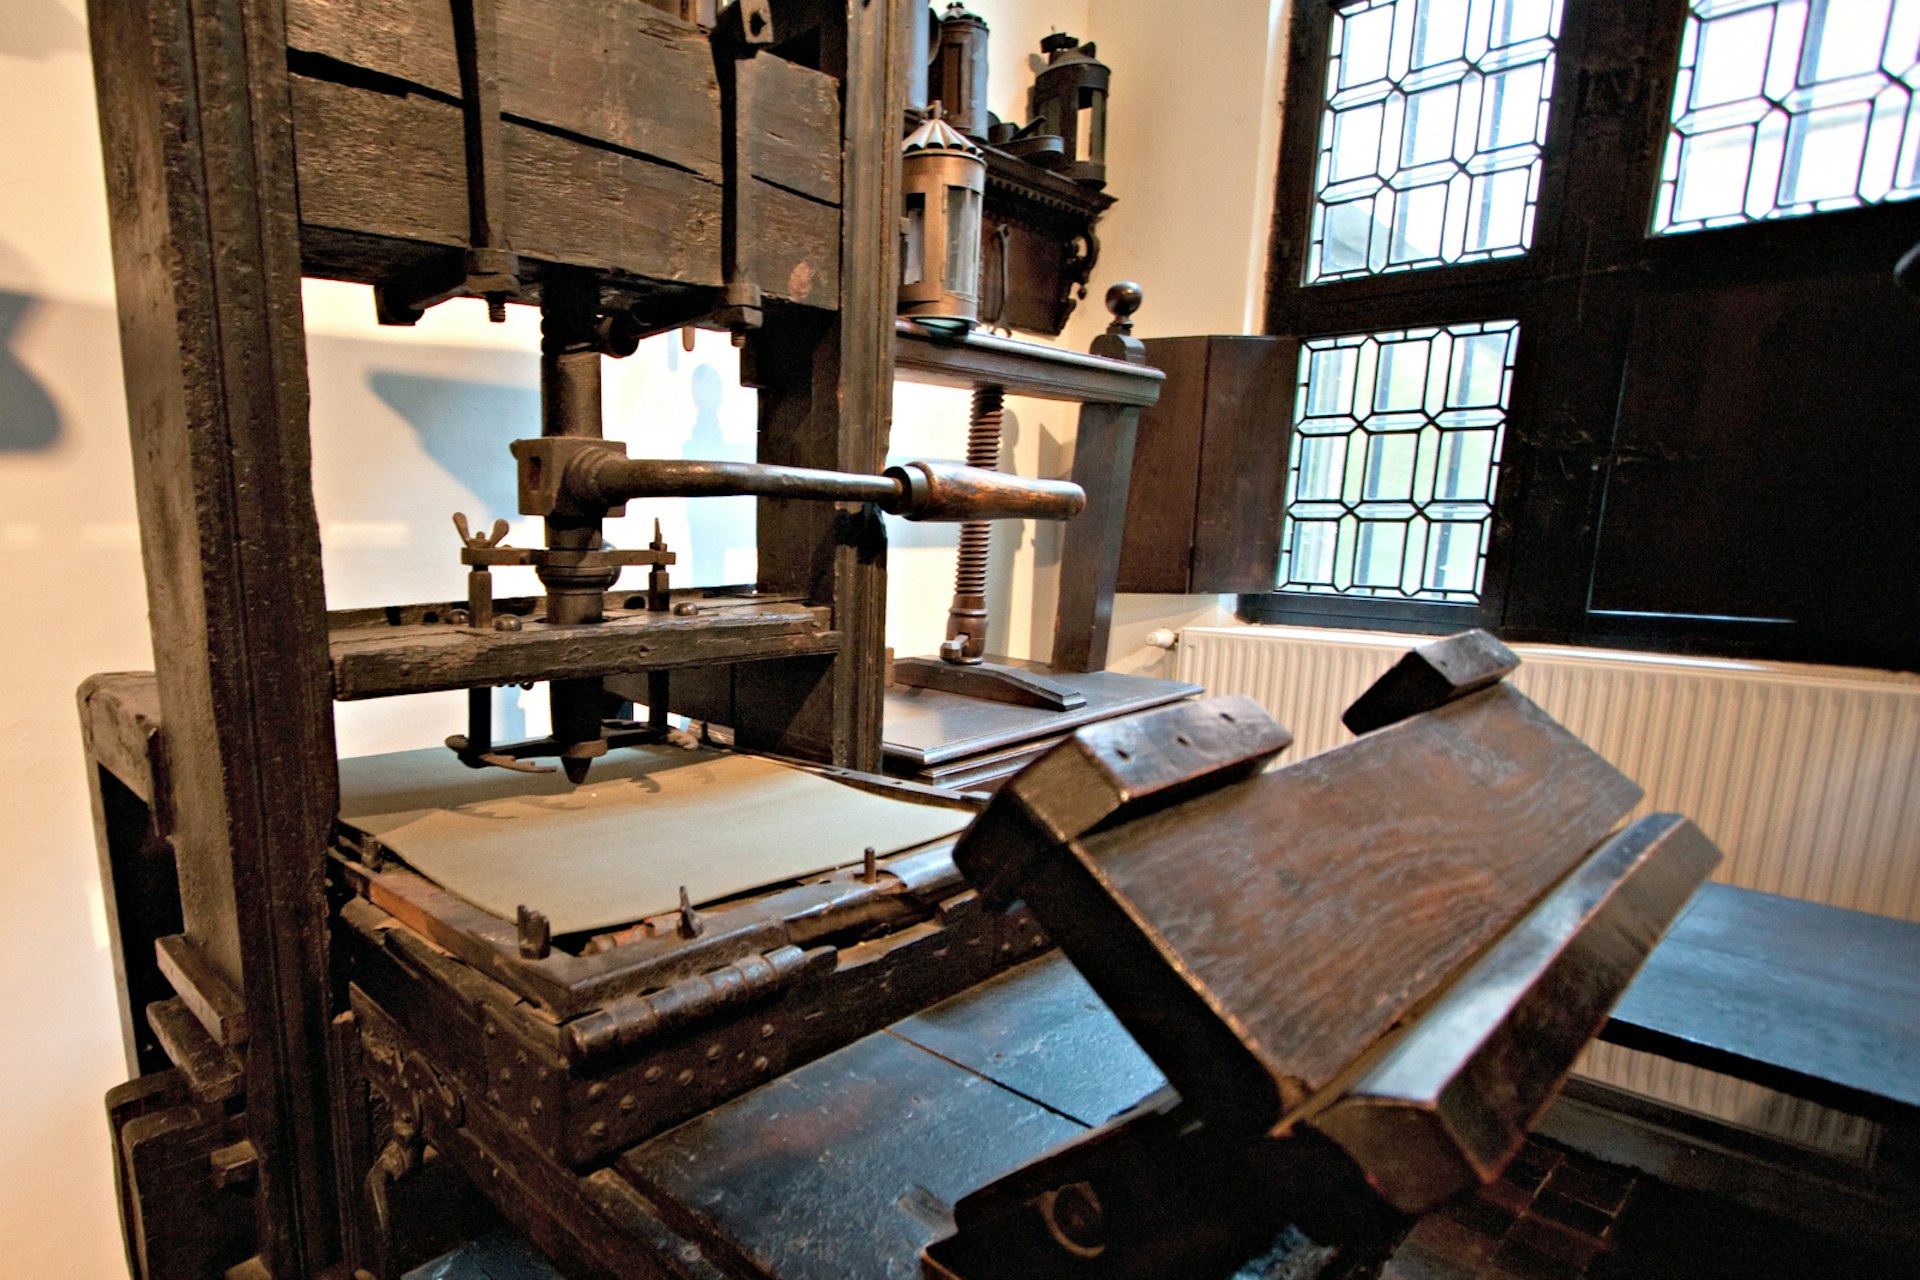 Two of the world's oldest printing presses on display in the printing room of the Plantin-Moretus House-Workshops-Museum, Antwerp, Belgium 